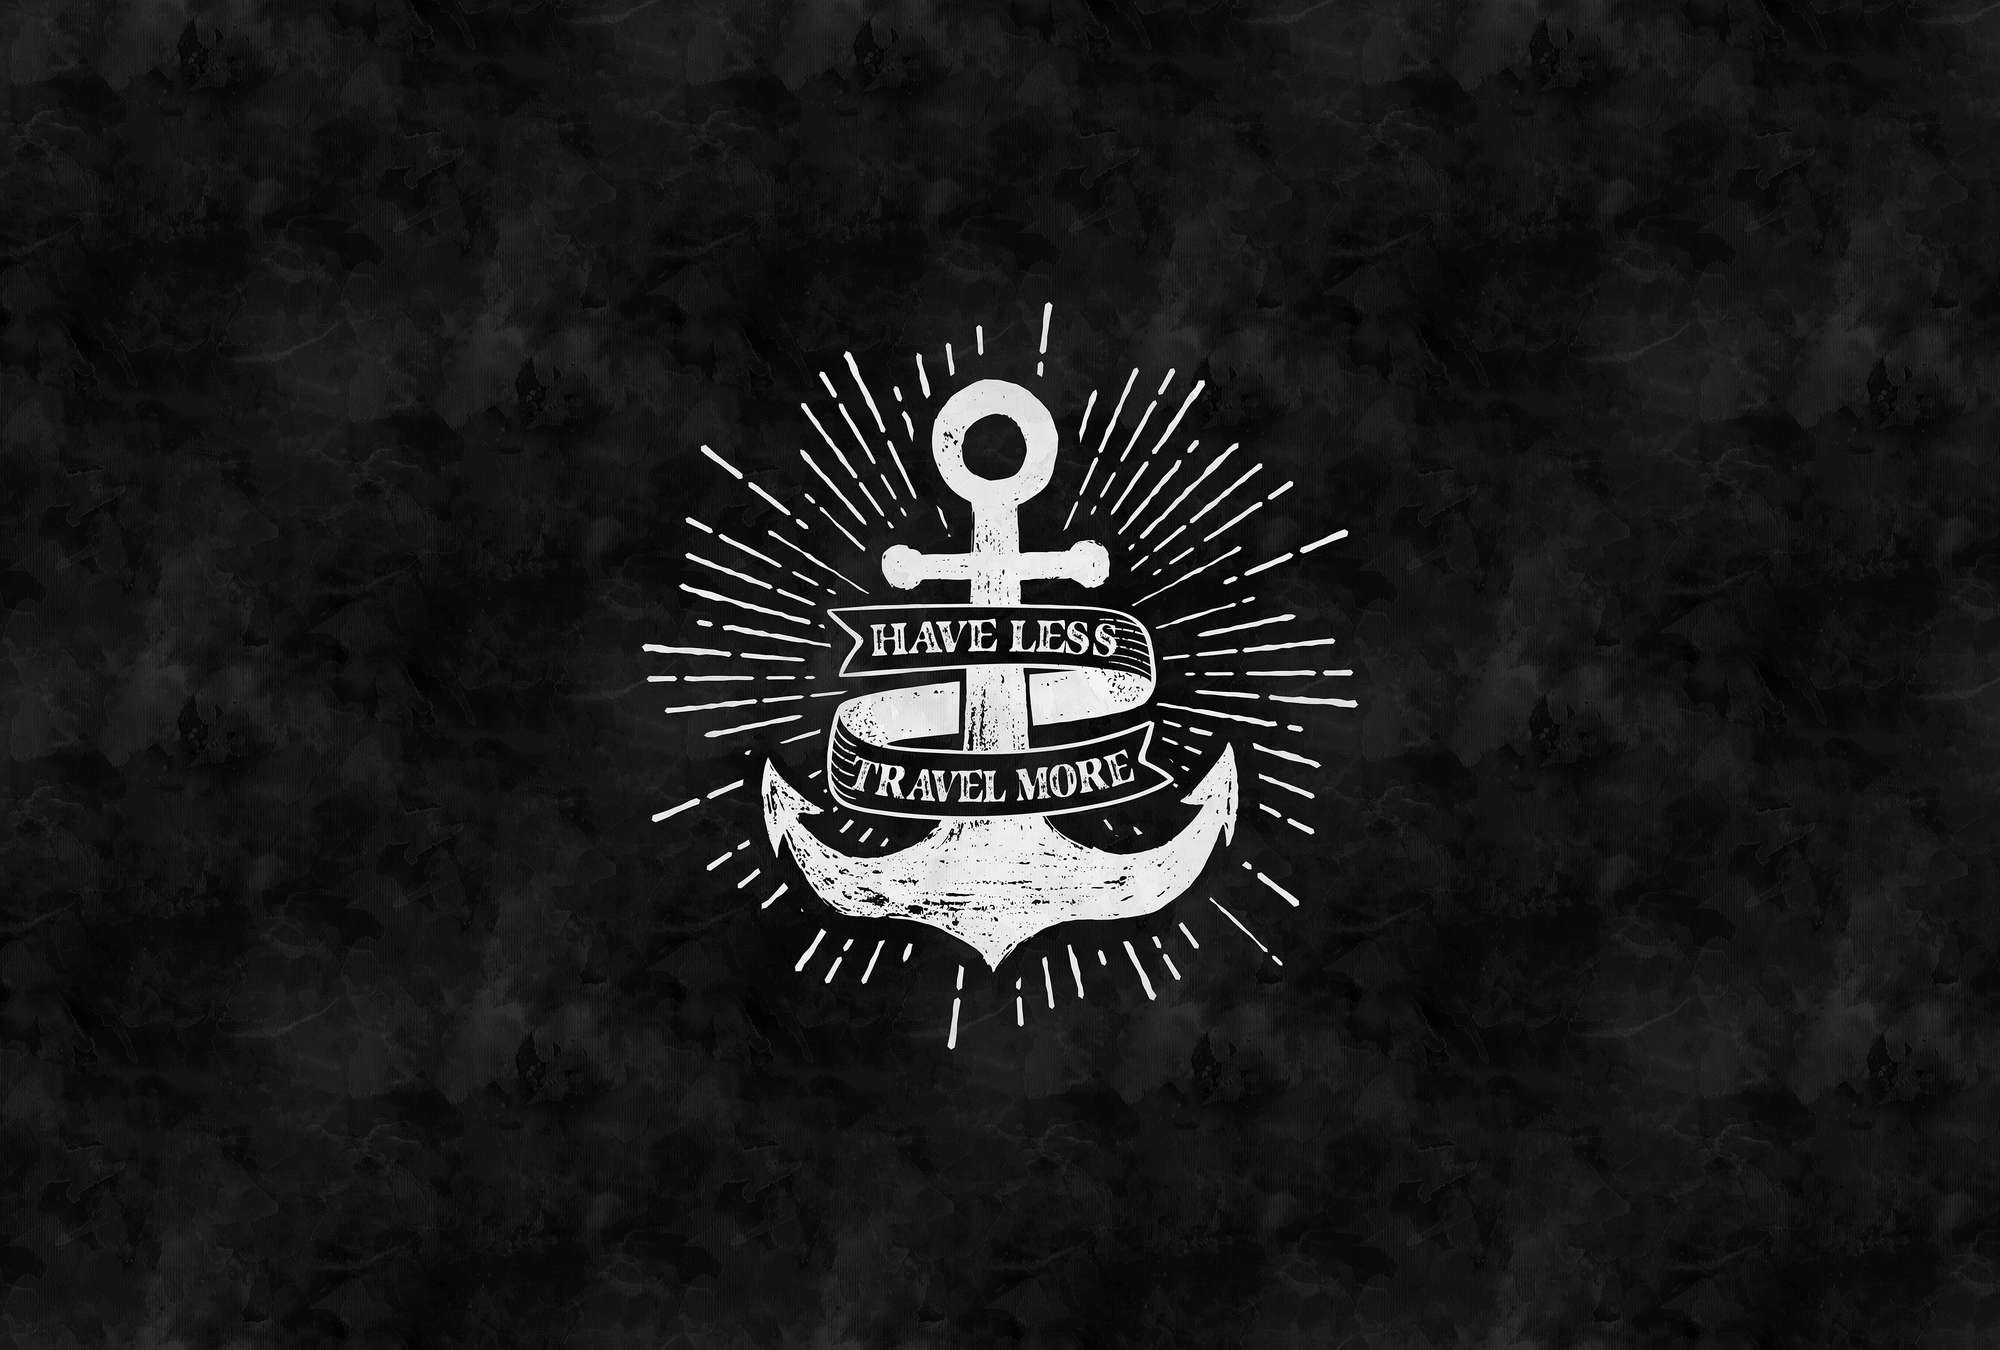             Black and white photo wallpaper anchor design in chalkboard look
        